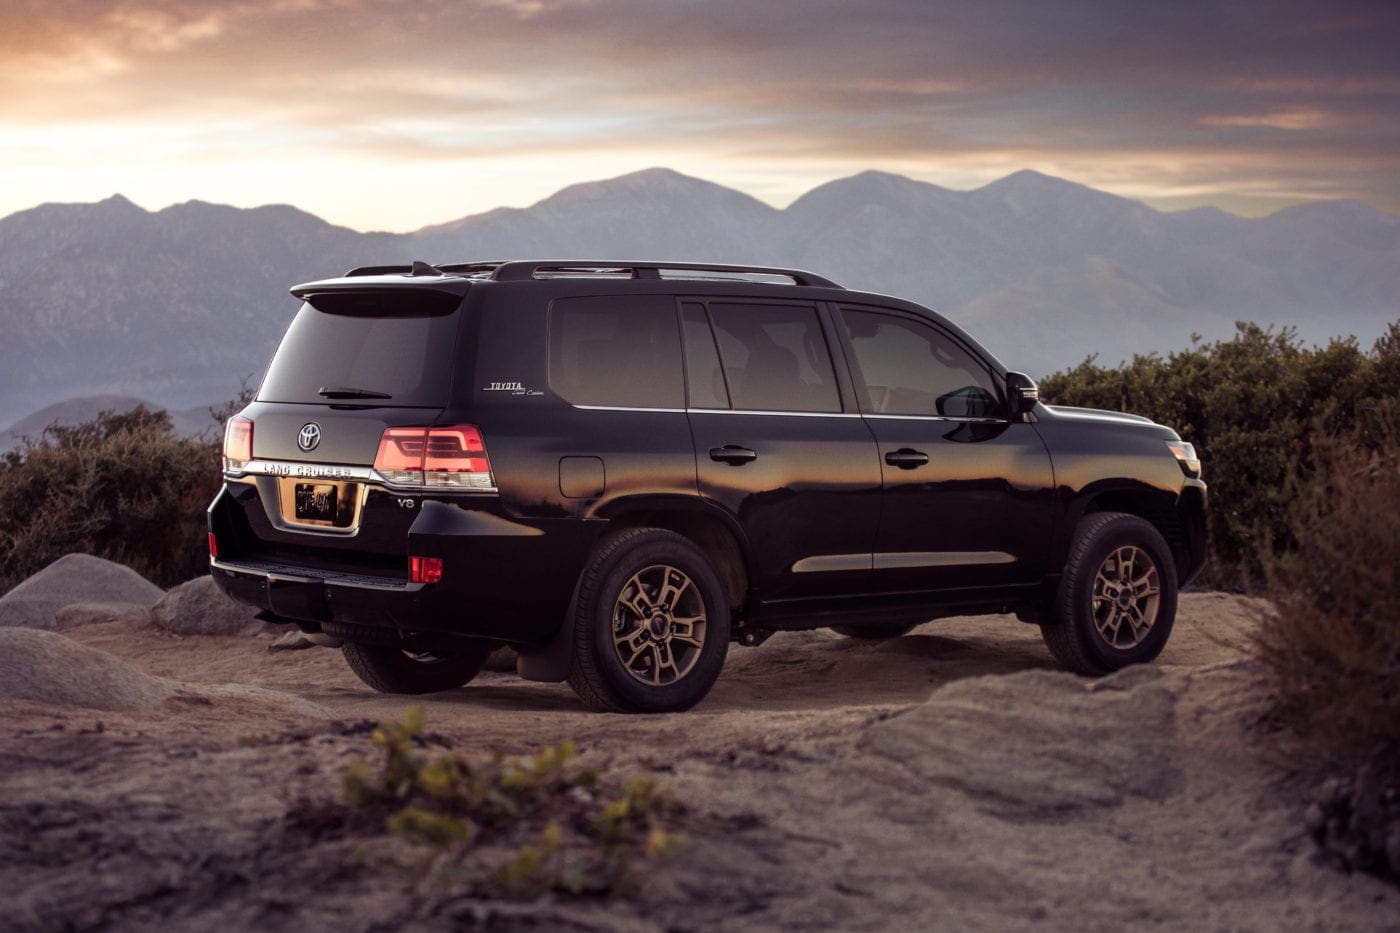 2020 Toyota Land Cruiser Heritage Edition: Six Decades & Counting